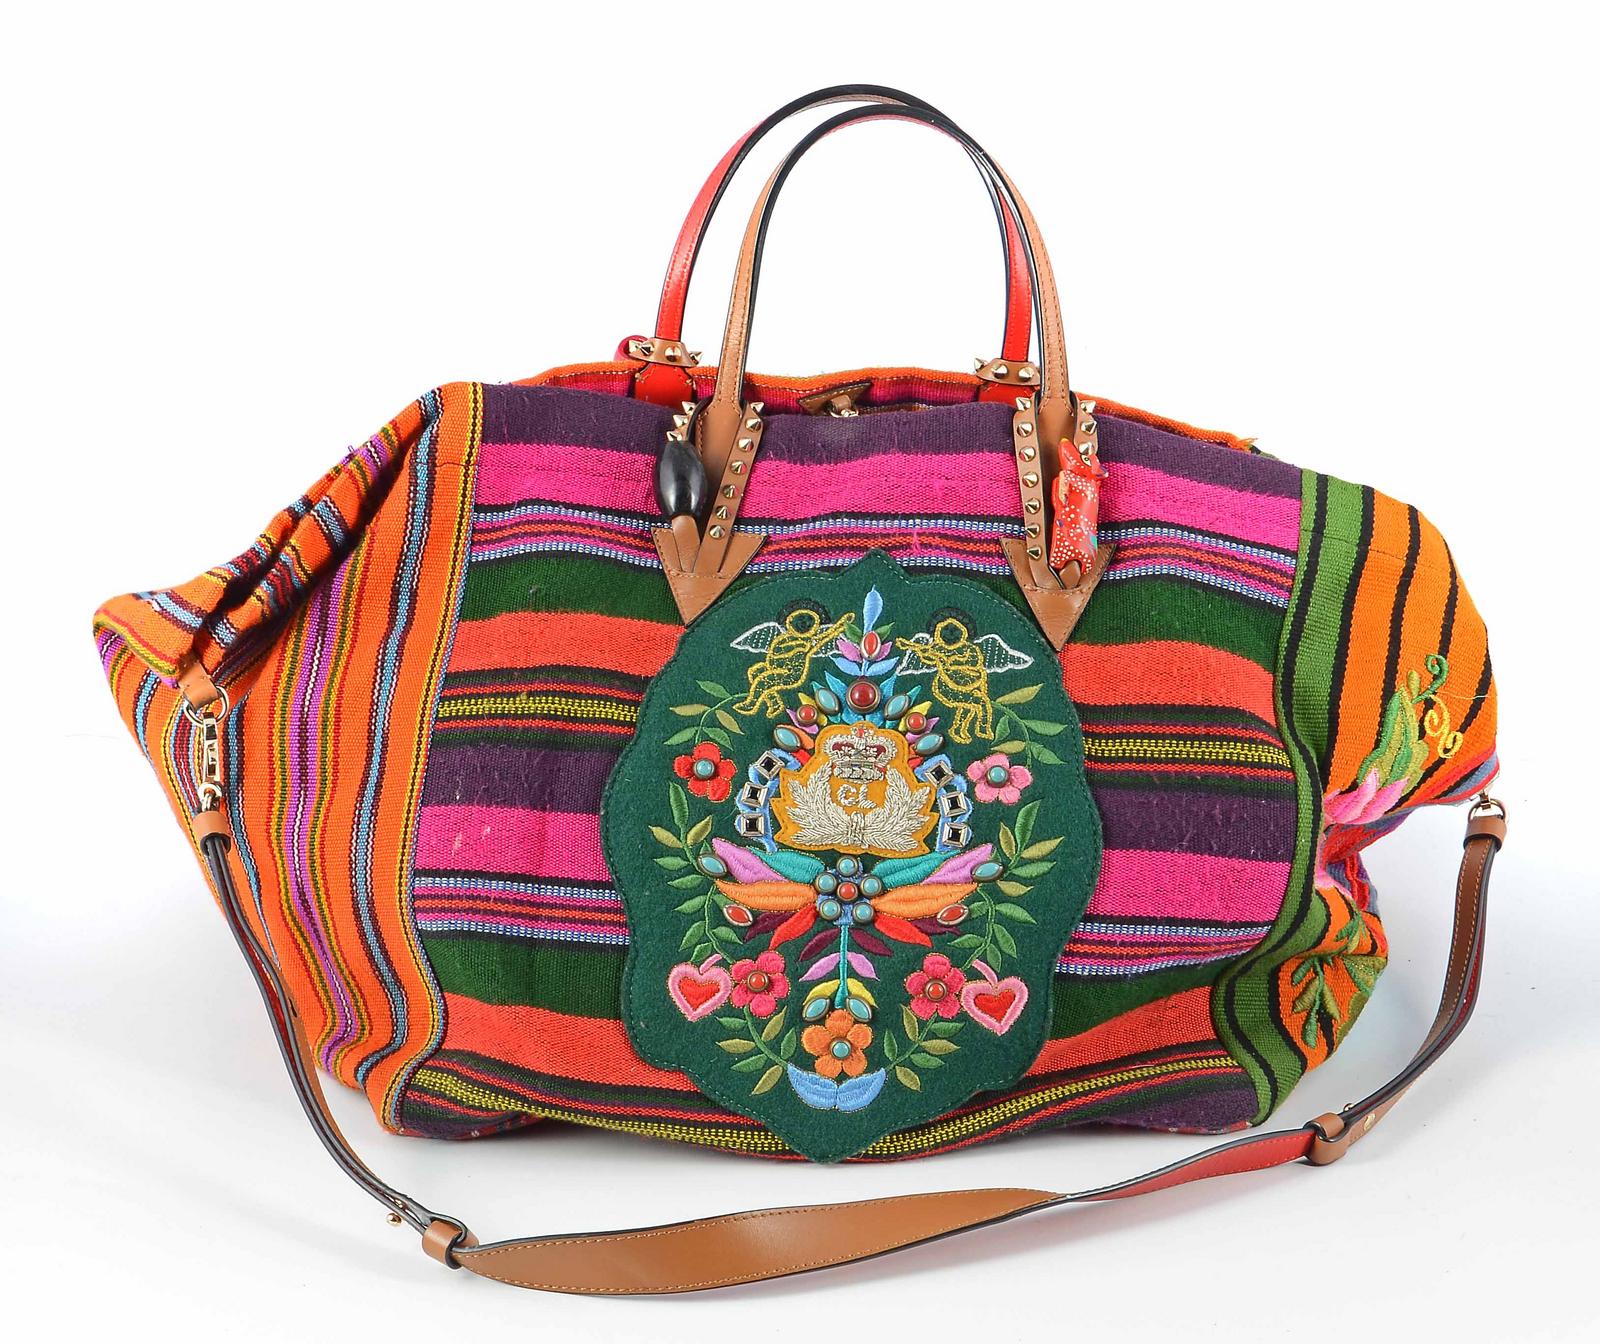 MEXICABA: Louboutin's Latest Collaboration With Taller Maya - InMexico